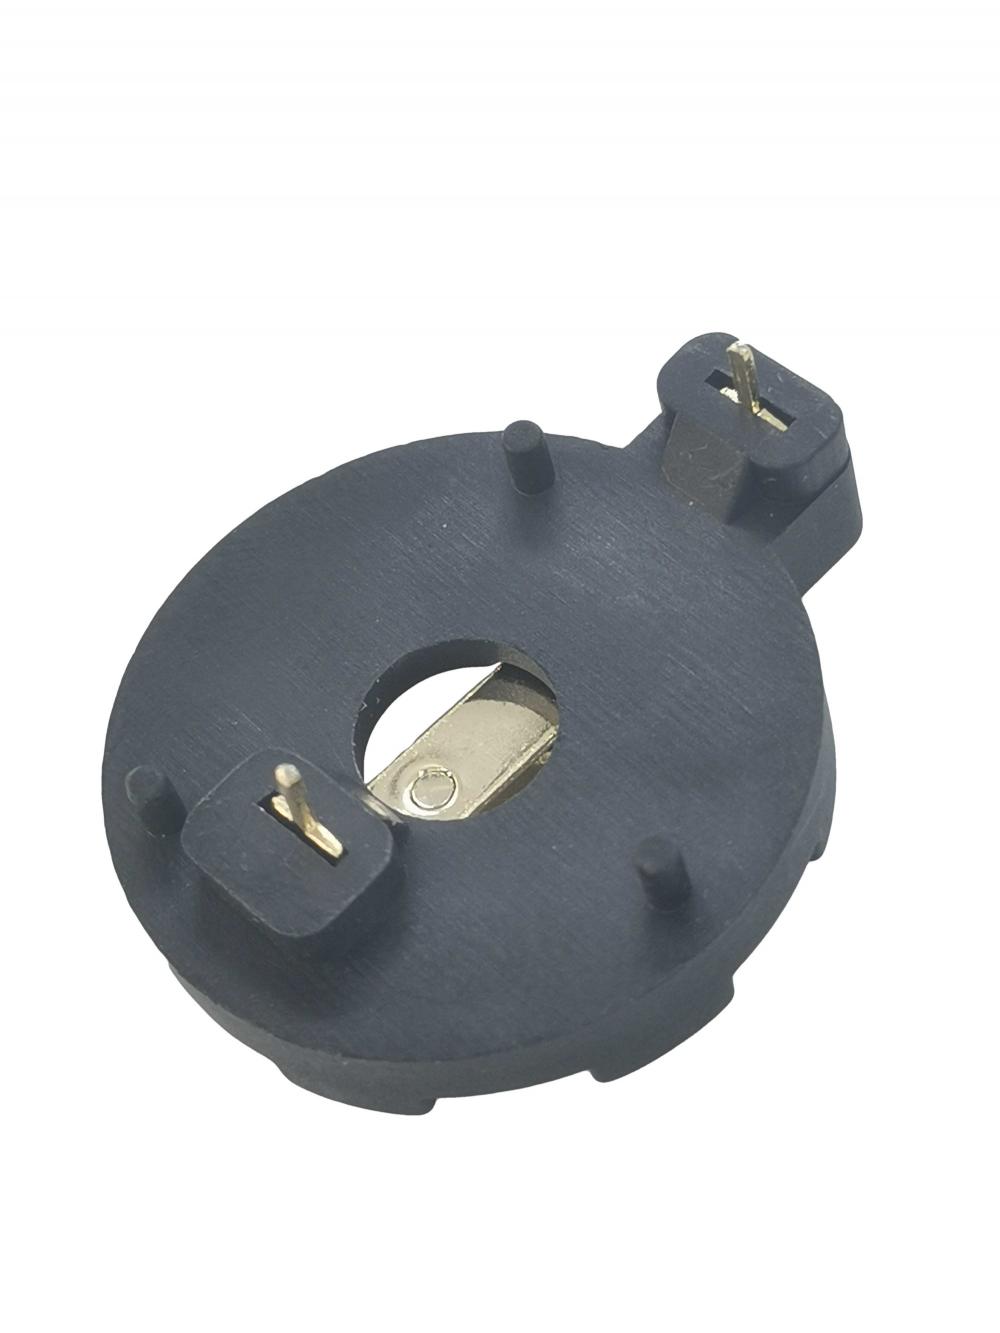 Surface Mount CR2032 Coin Cell Battery Holders